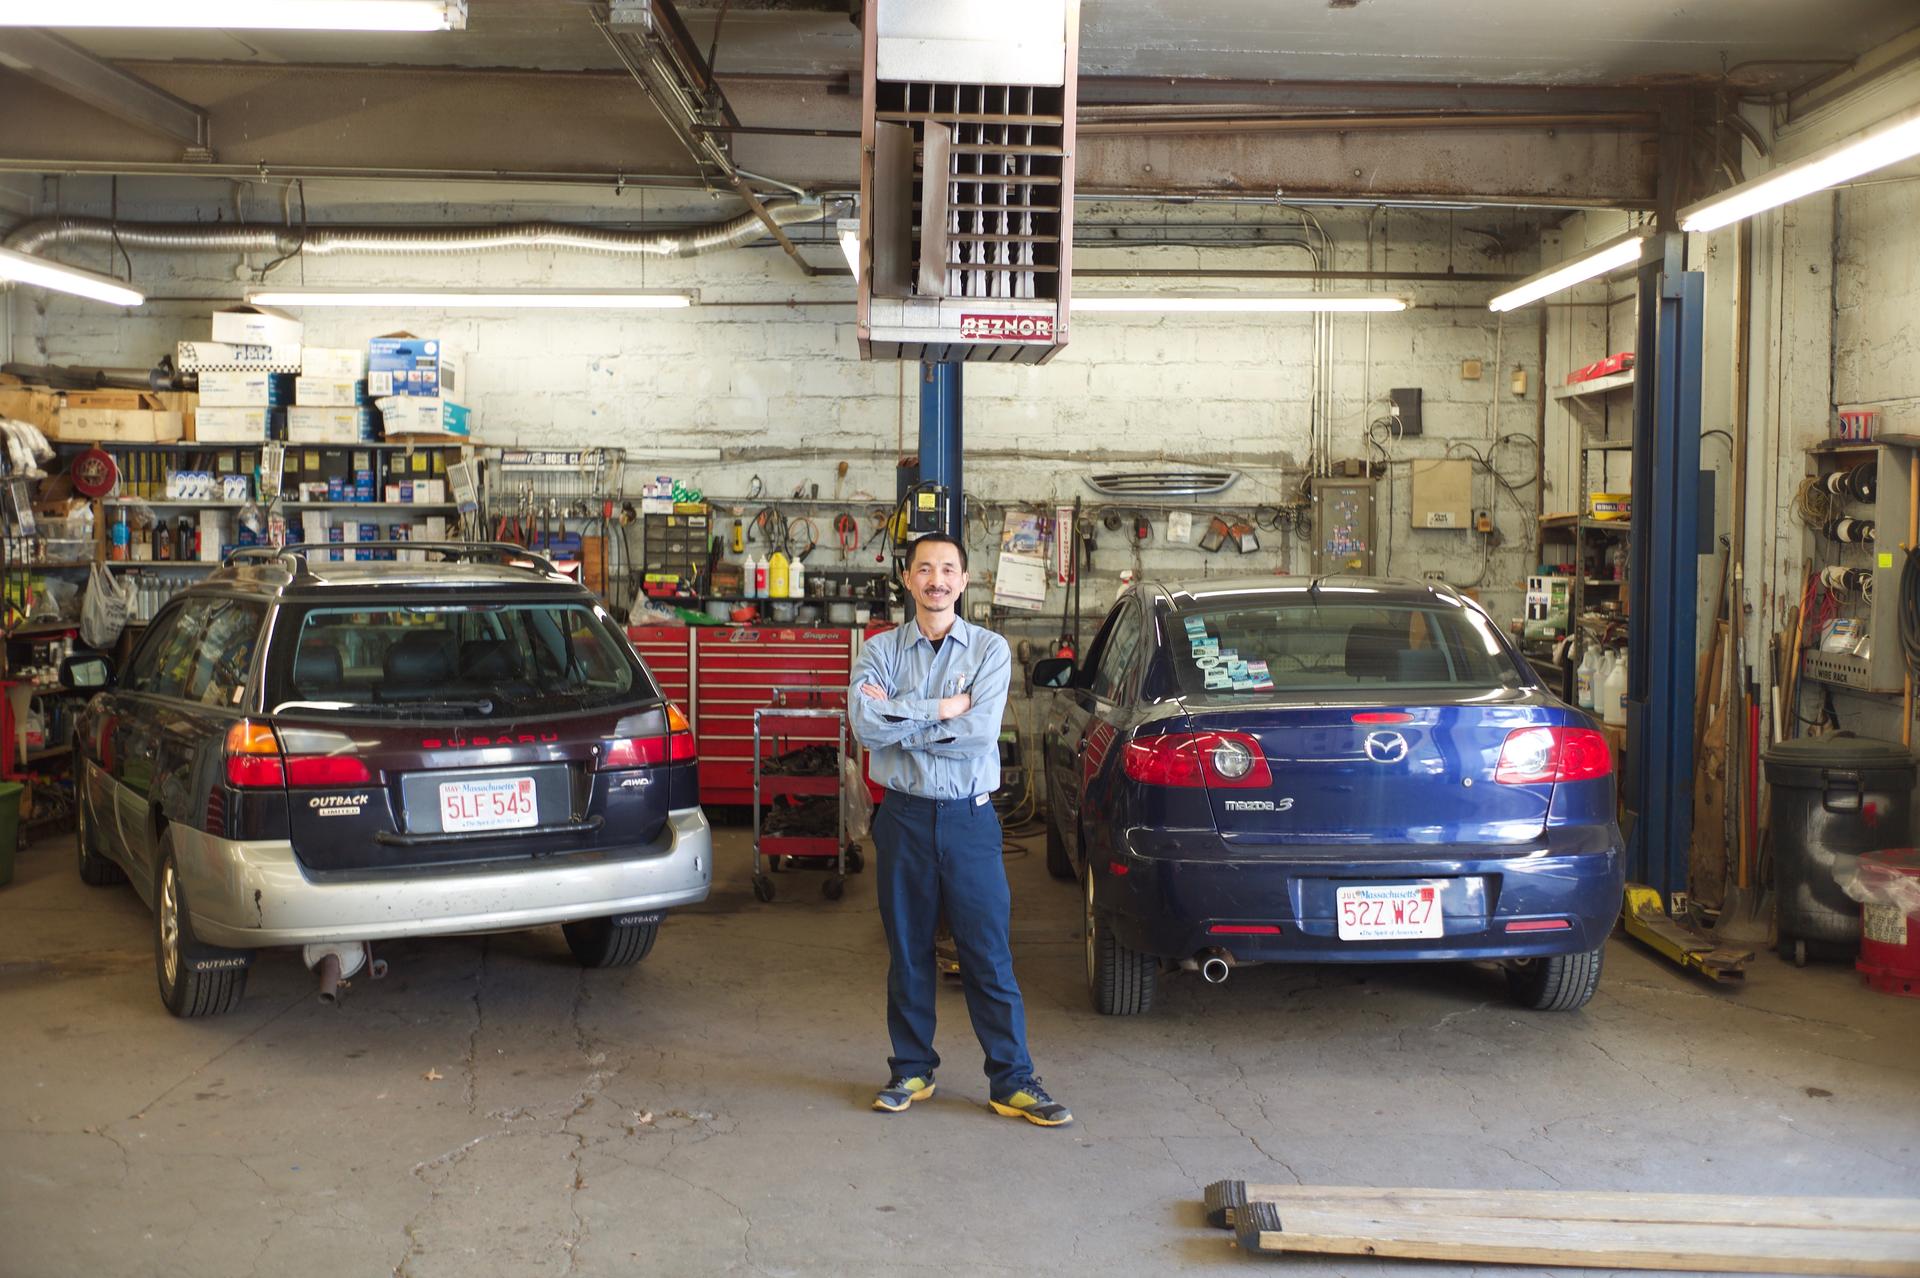 Guang Lin stands with cars in his Cambridge shop.